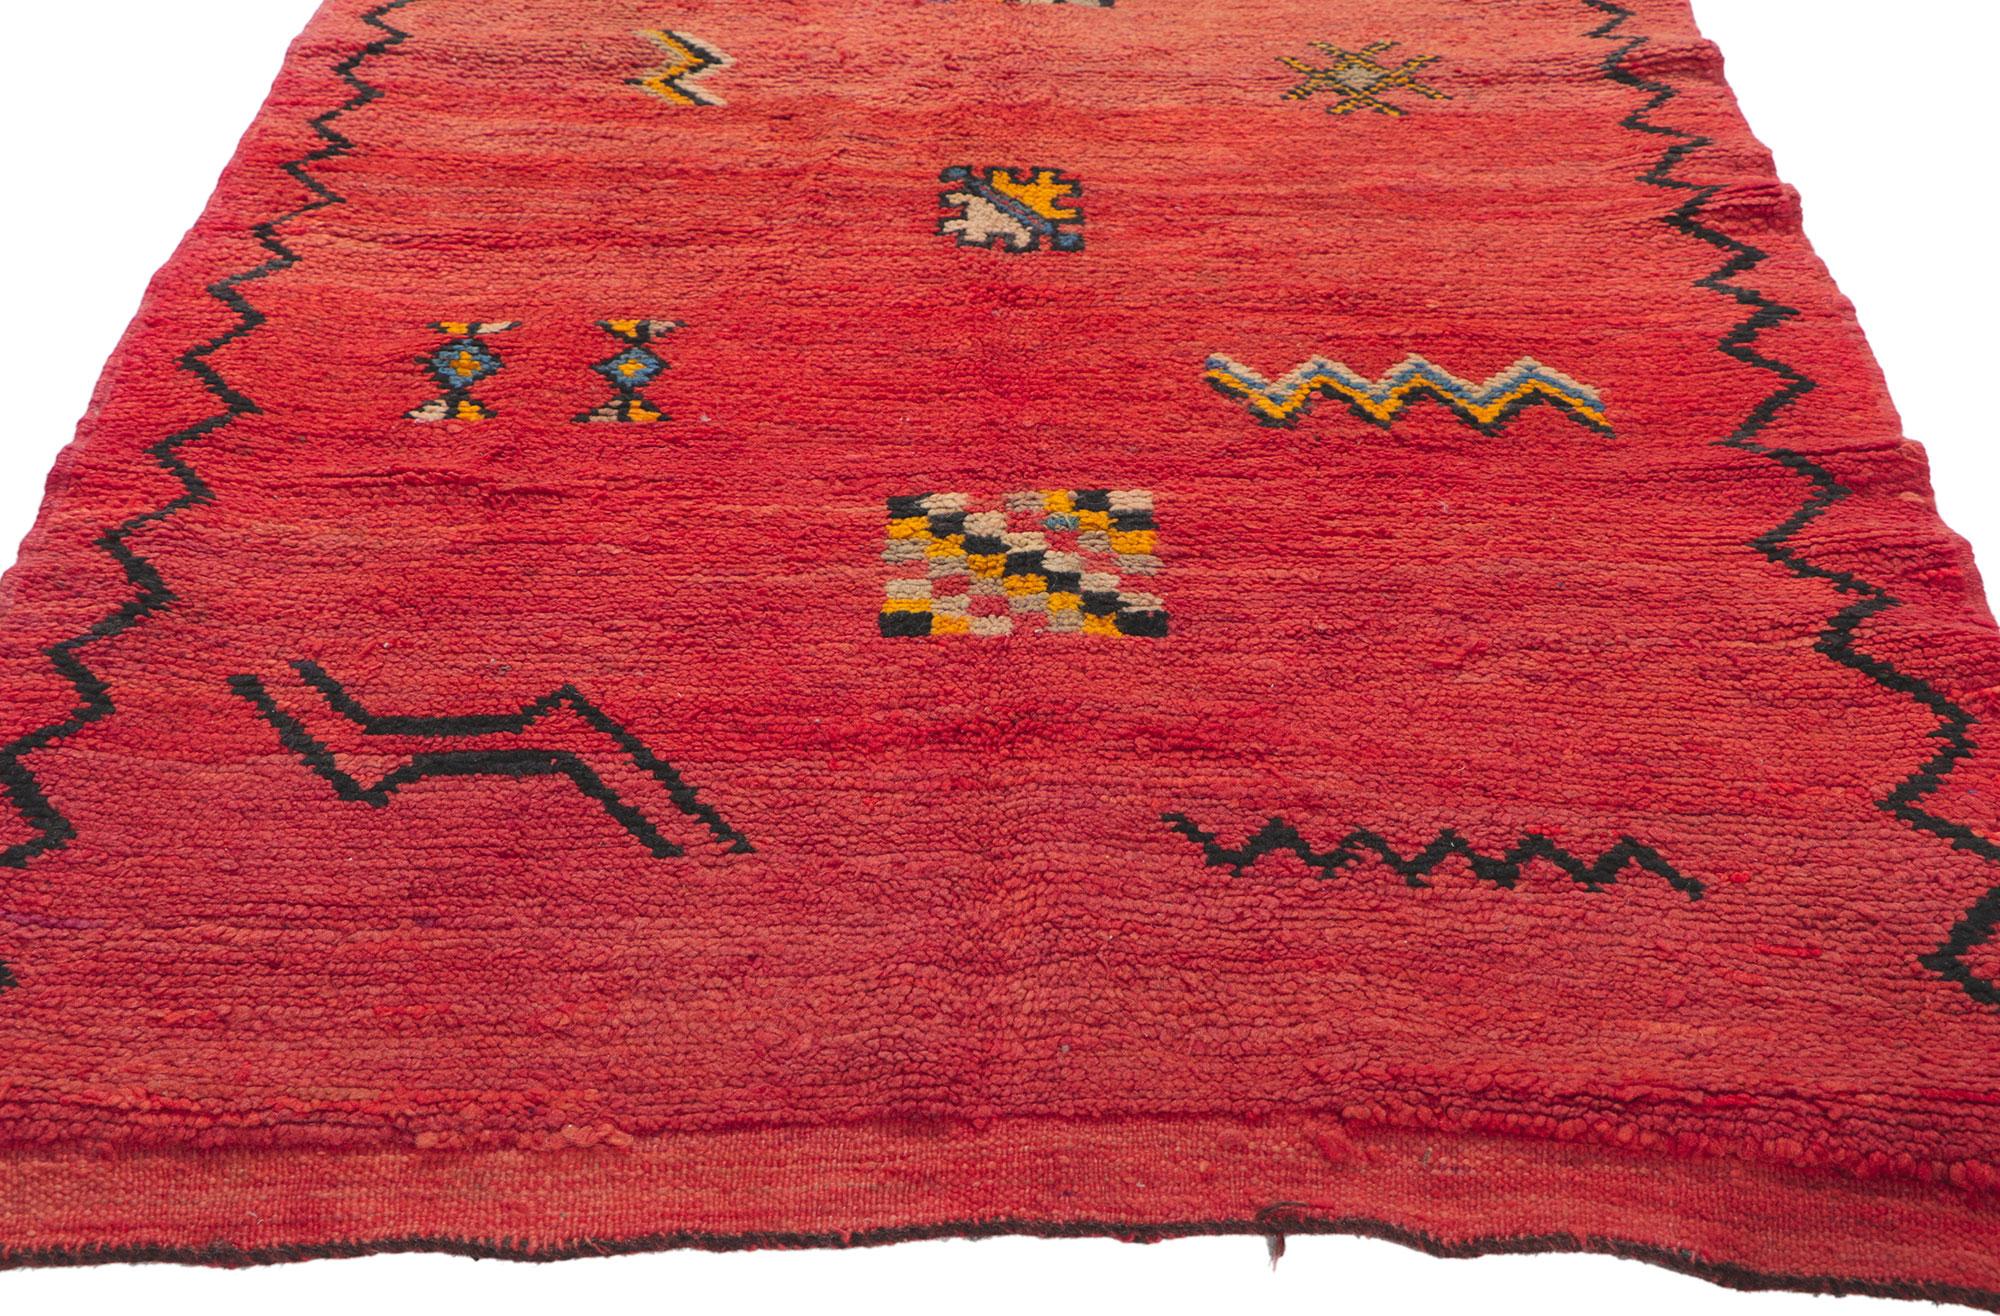 Vintage Red Boujad Moroccan Rug by Berber Tribes of Morocco In Good Condition For Sale In Dallas, TX